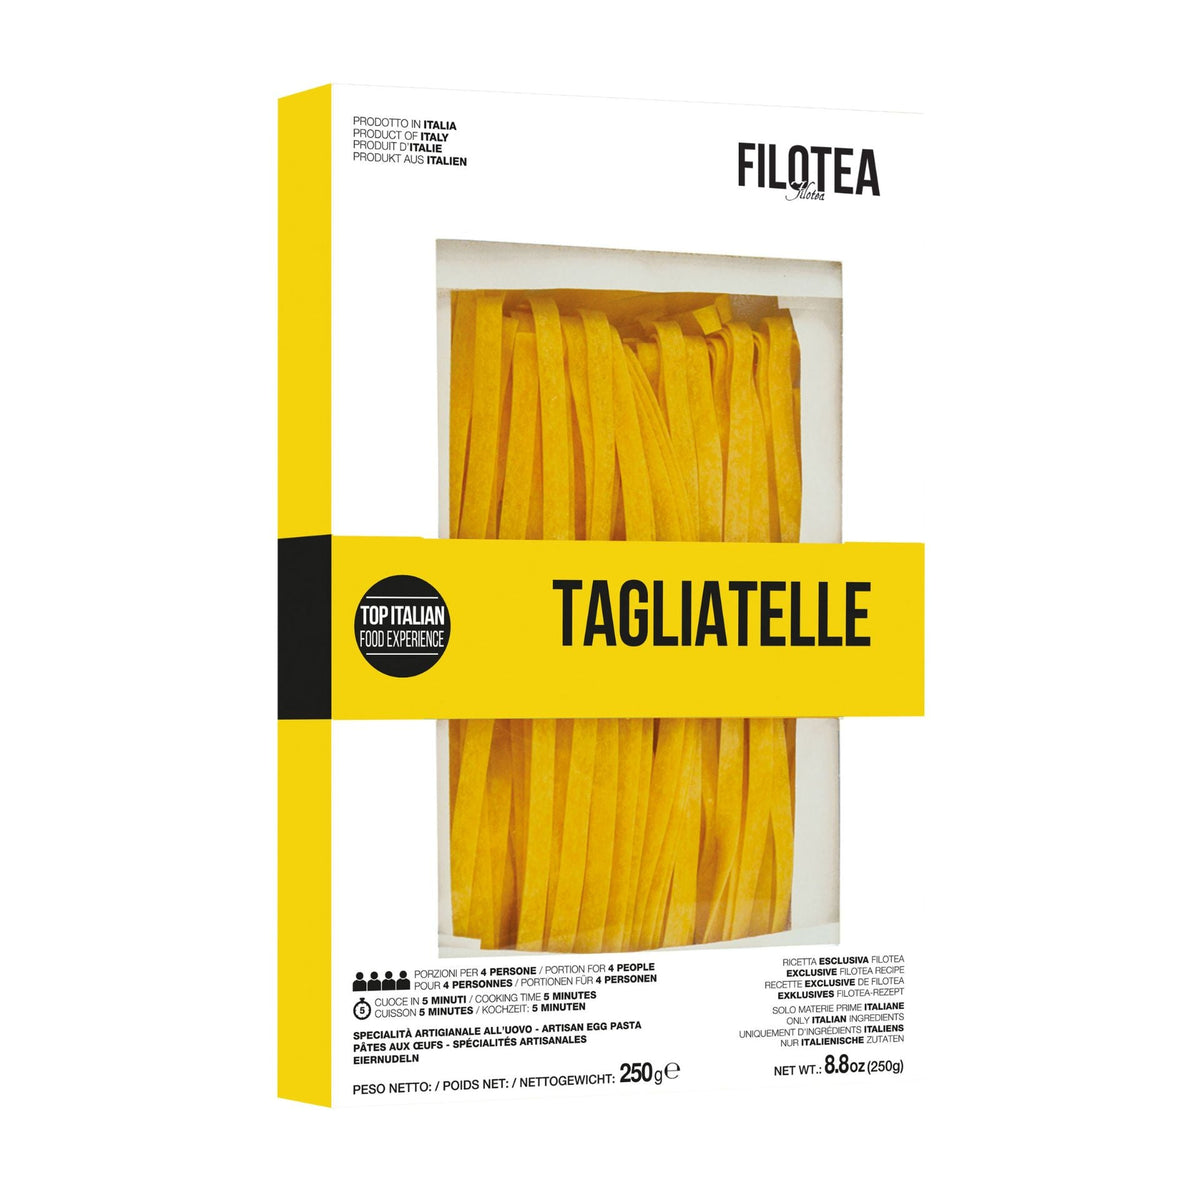 Filotea Tagliatelle Artisan Egg Pasta 250g  | Imported and distributed in the UK by Just Gourmet Foods